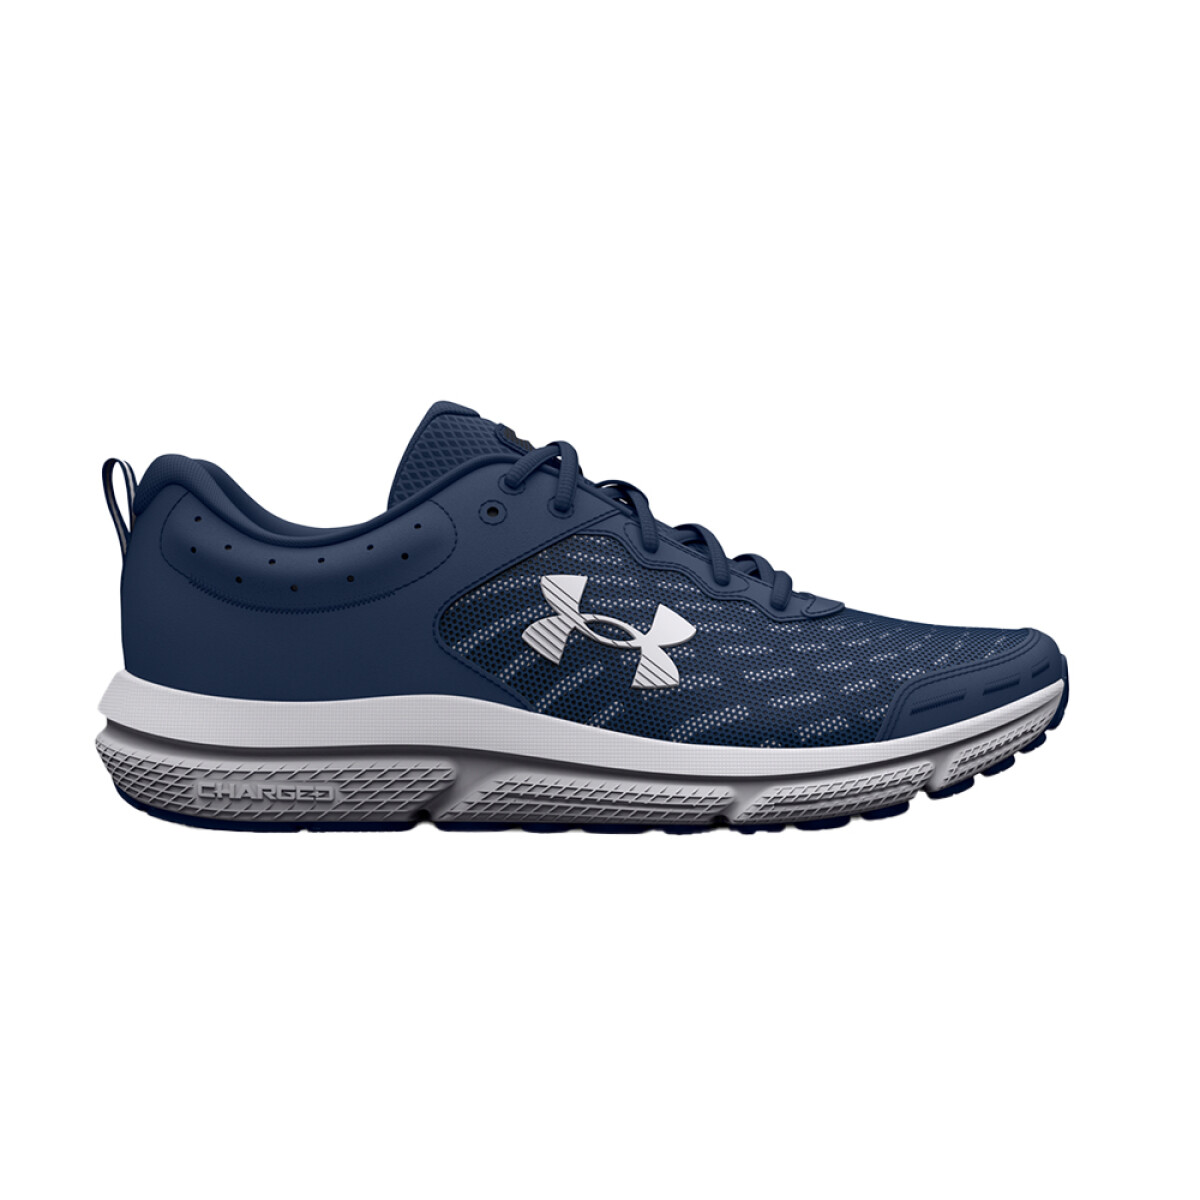 UNDER ARMOUR CHARGED ASSERT 10 - Blue 